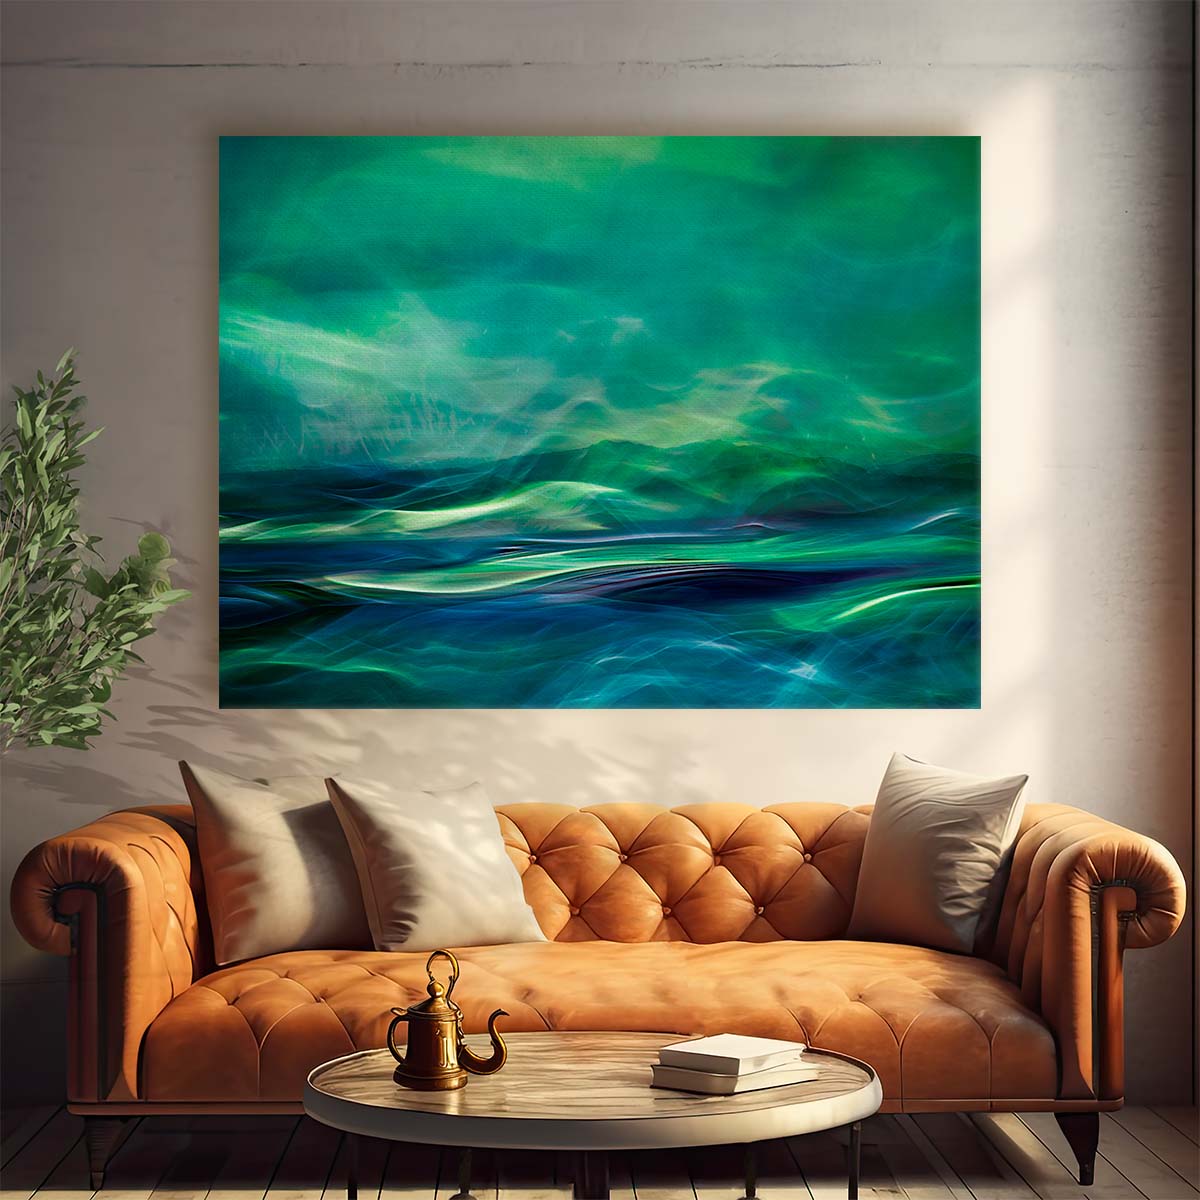 Enchanted Norway Aurora Seascape Dream Wall Art by Luxuriance Designs. Made in USA.